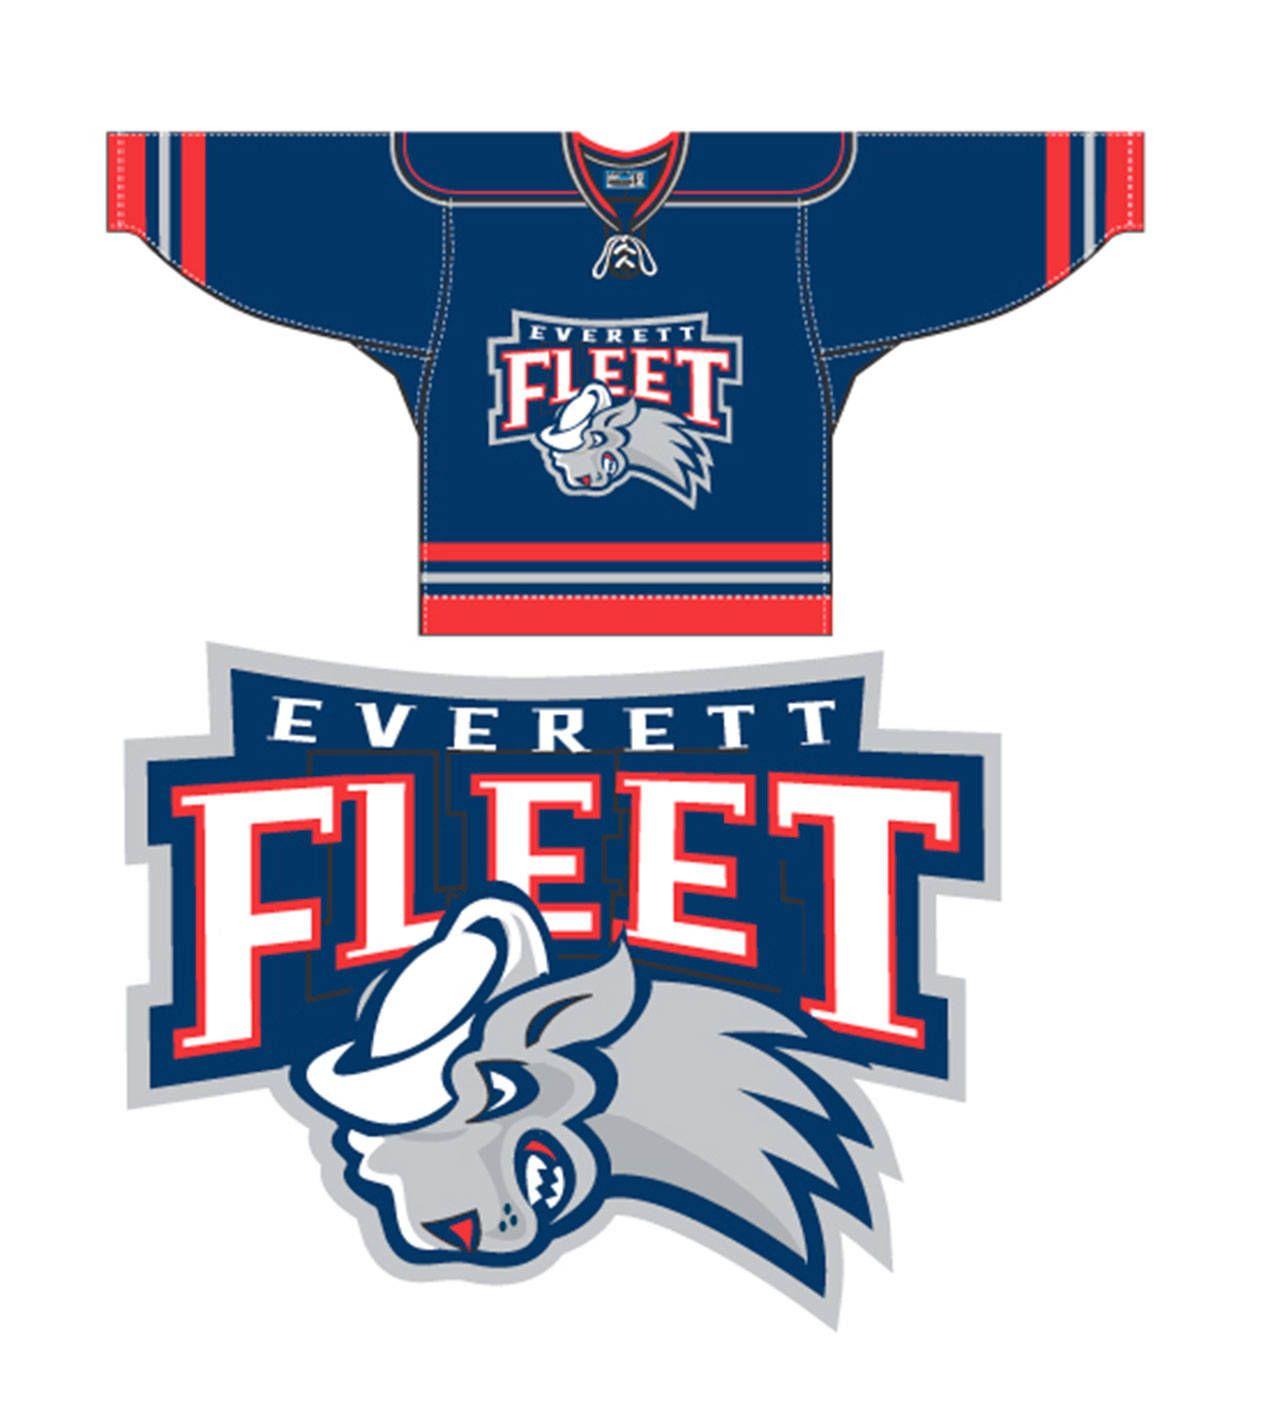 Silvertips Logo - You knew his work with Silvertips, but likely didn't know him